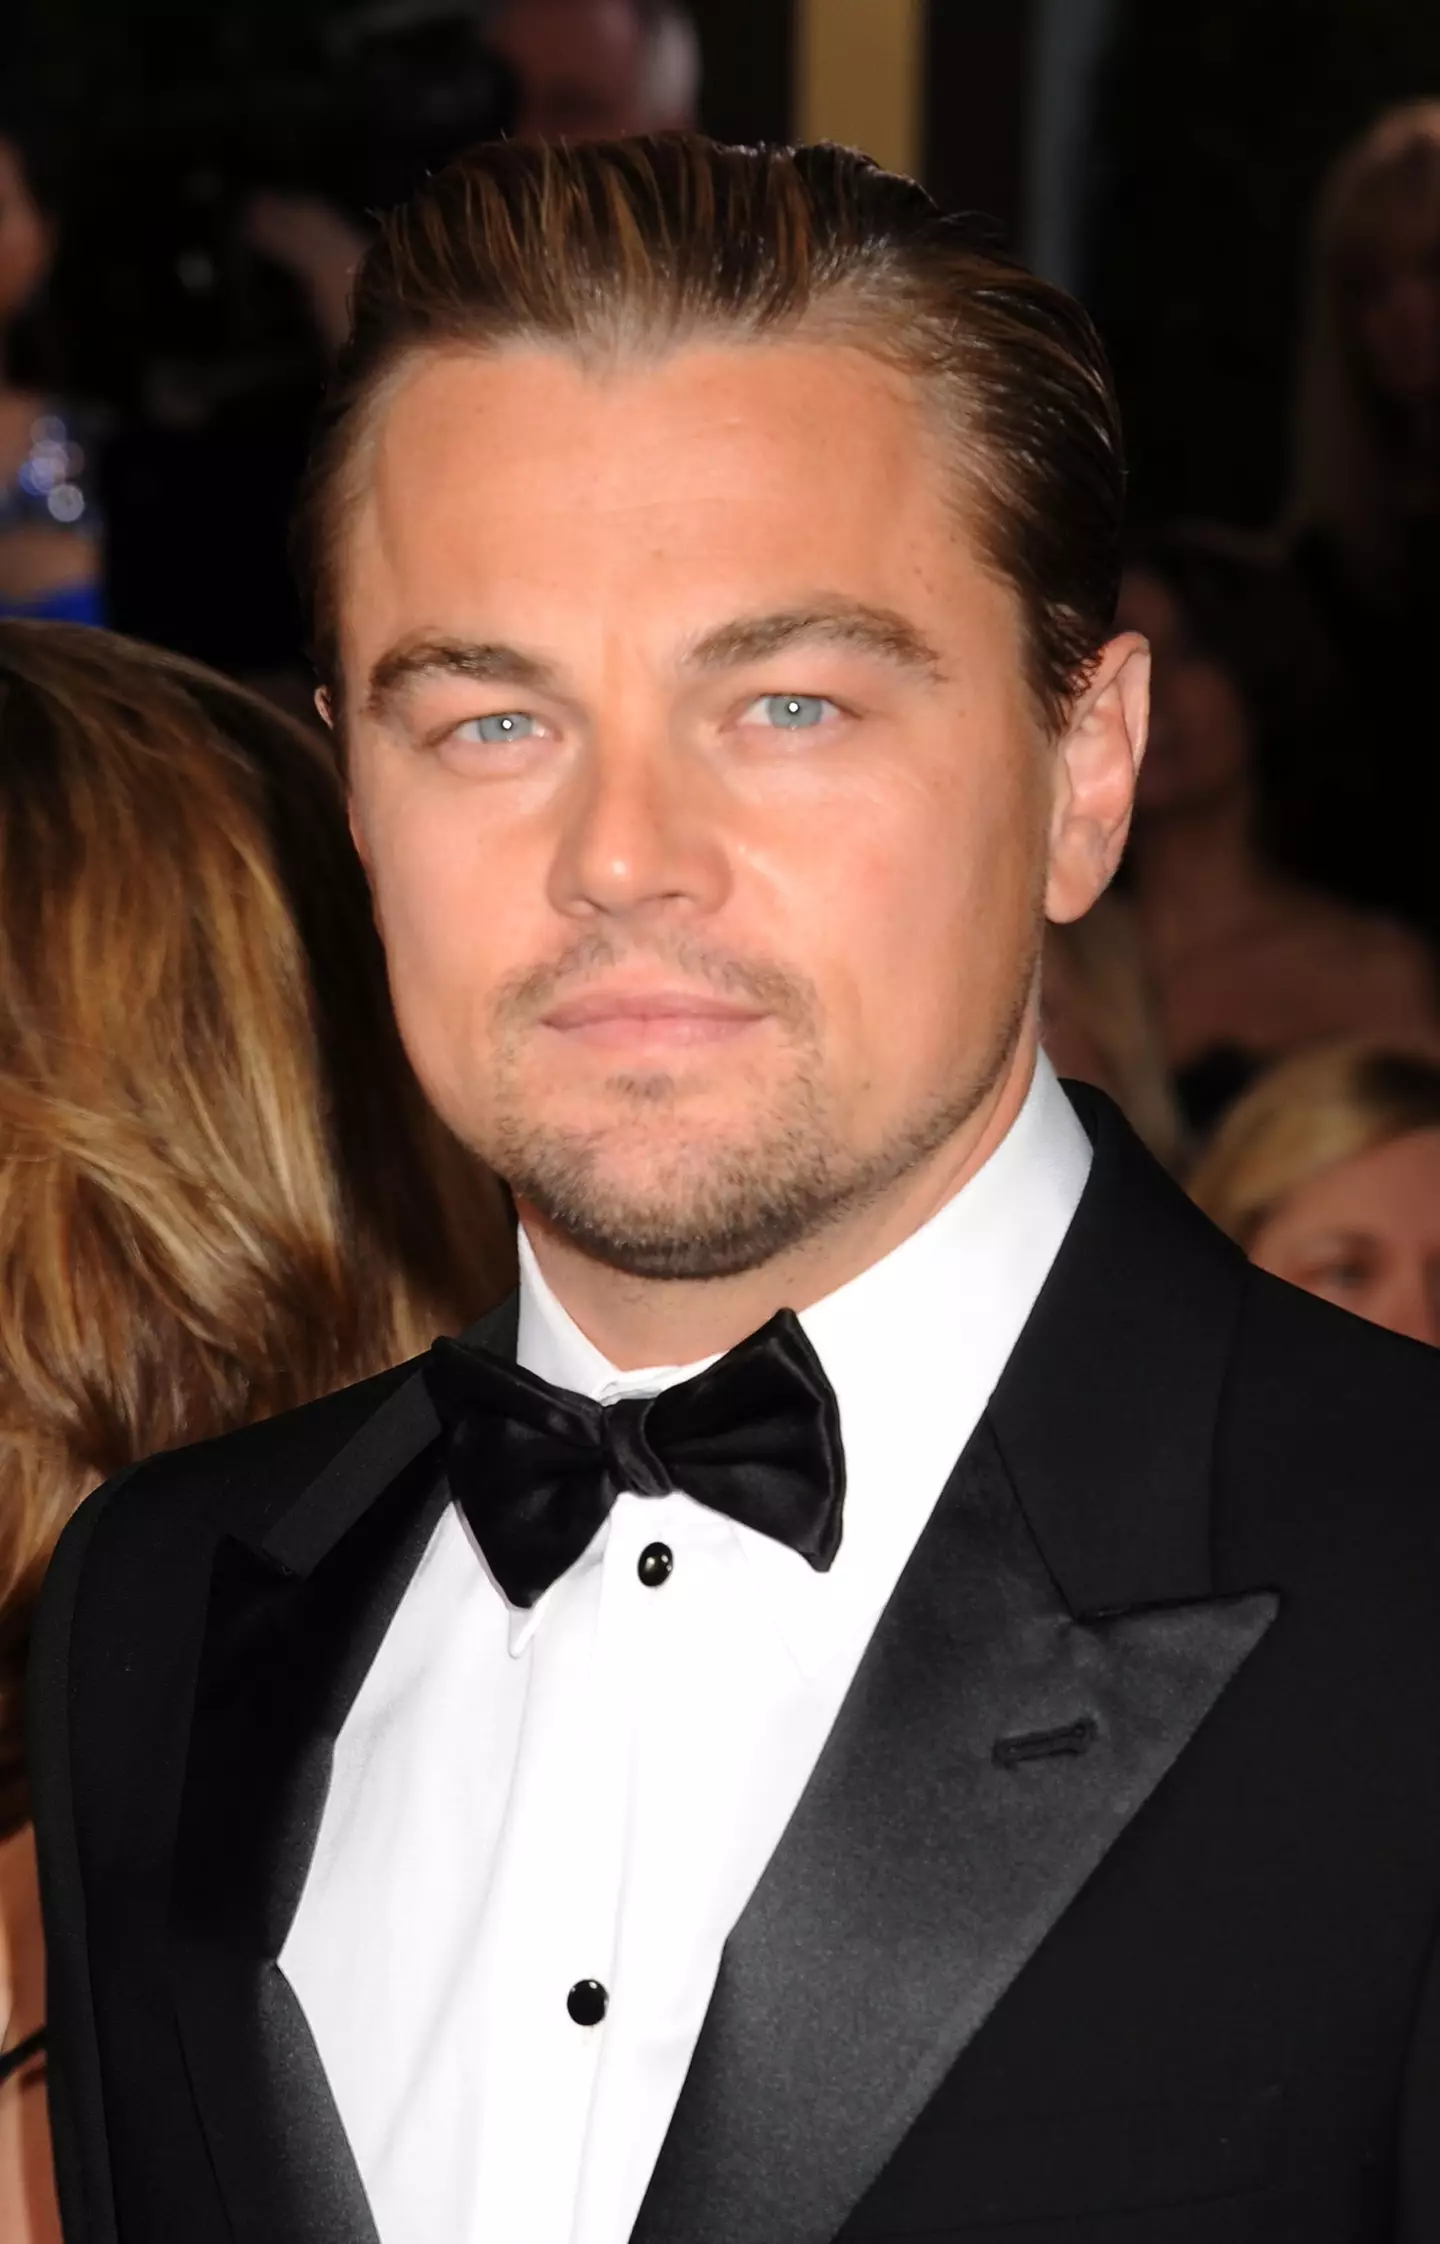 Leonardo DiCaprio was almost called something very different.